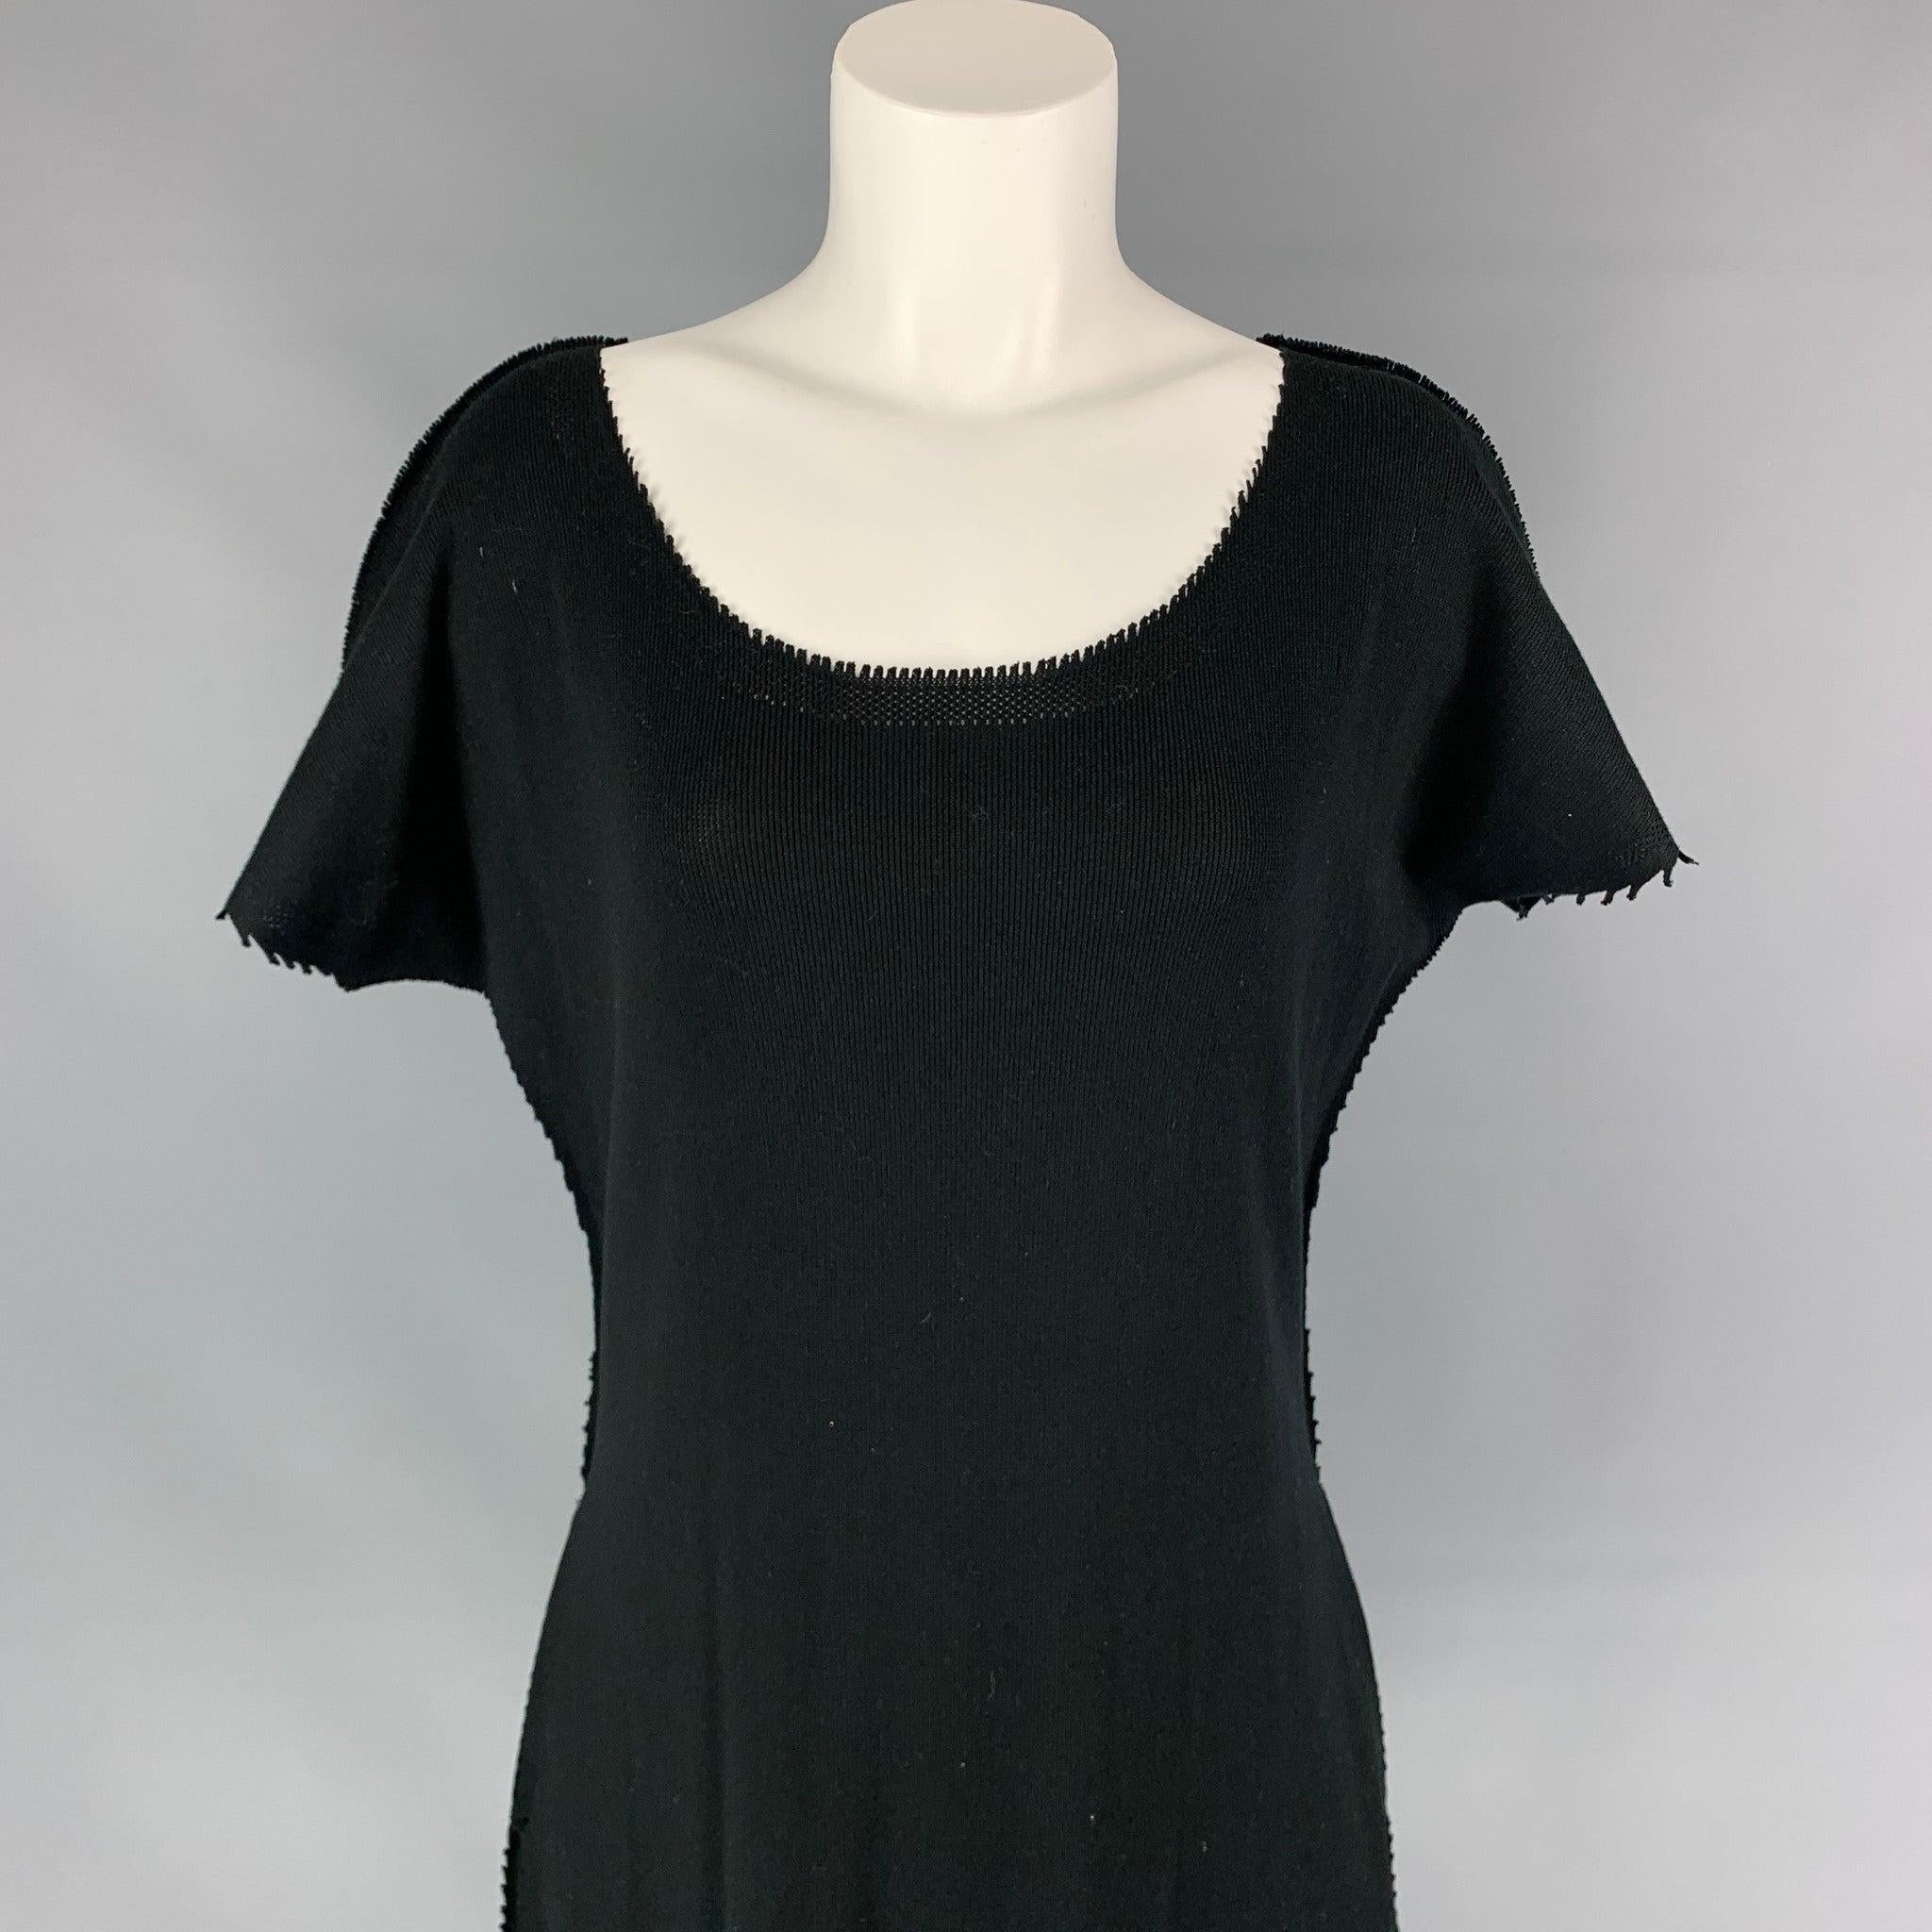 ISSEY MIYAKE dress comes in a black knitted material featuring a shift style, raw edges, slit pockets, and a loose neckline. Made in Japan.Very Good
Pre-Owned Condition. 

Marked:   JP 2 

Measurements: 
 
Shoulder: 18.5 inches  Bust: 48 inches 